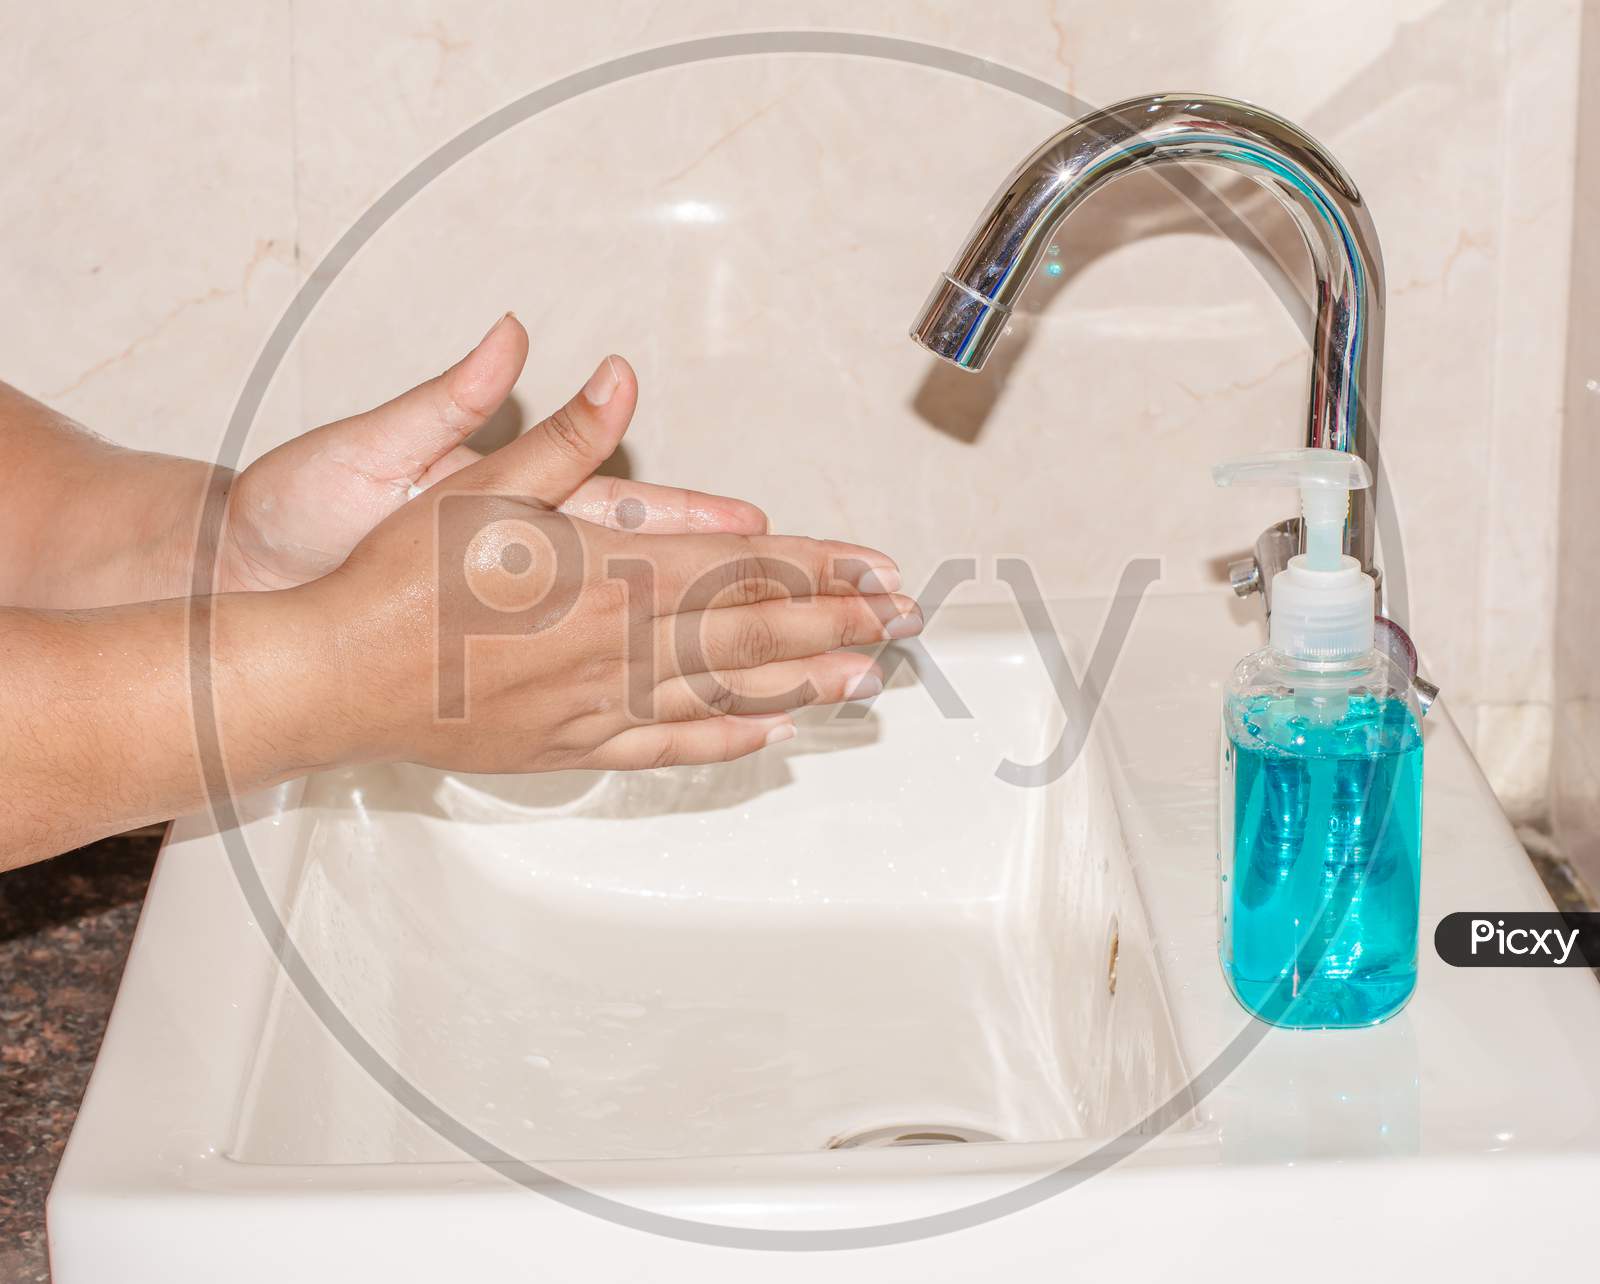 Hand Hygiene - Corona virus prevention, Cleaning Hands with Hand washing Soap. Protection by washing hands frequently